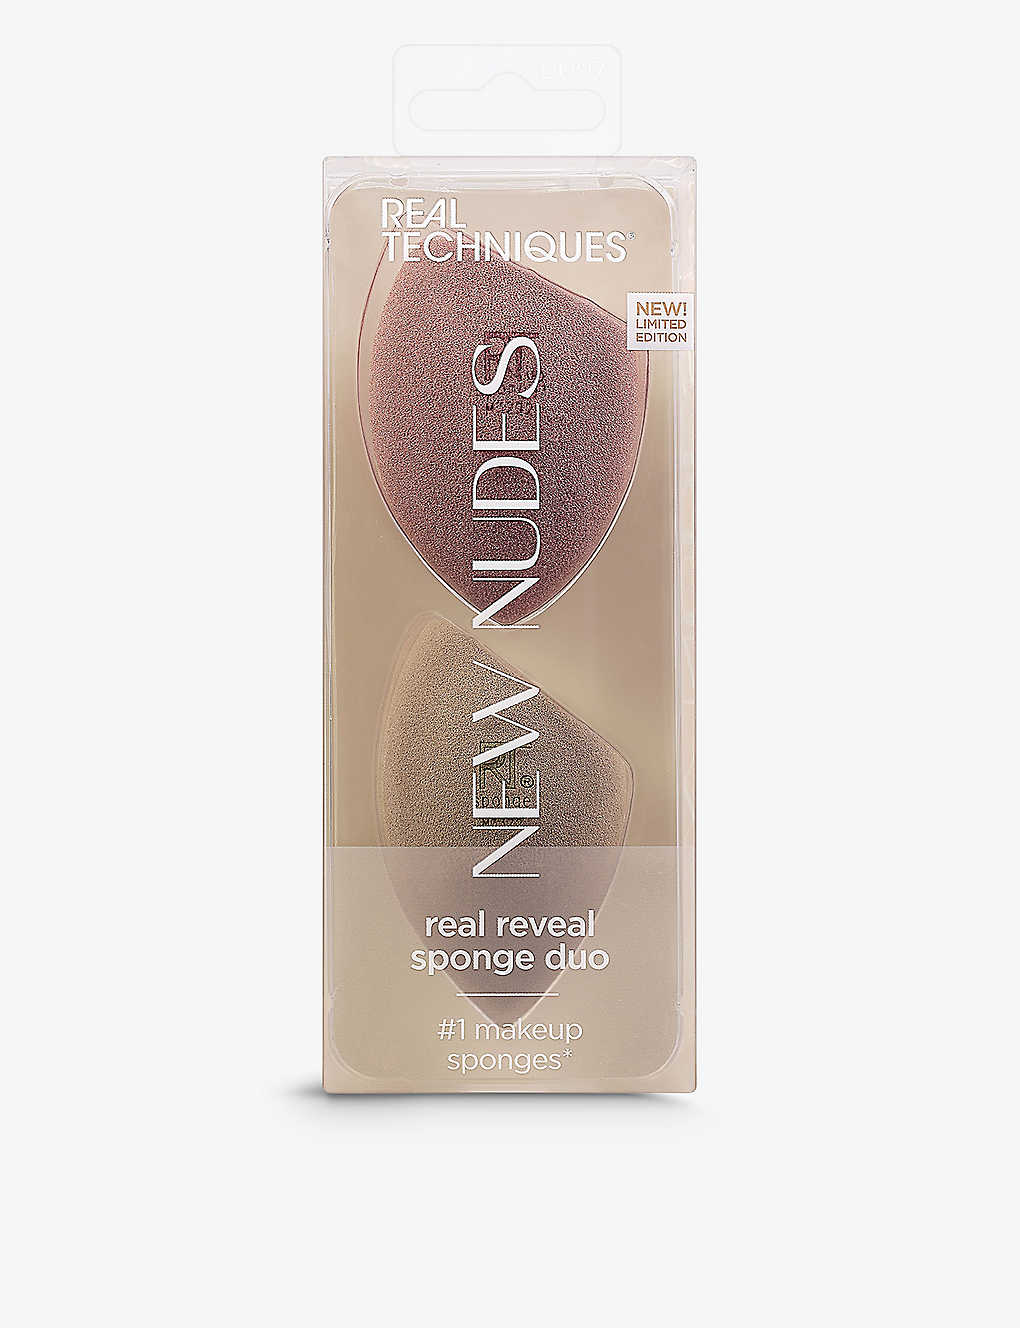 Real Techniques New Nudes Real Reveal Limited-edition Make-up Sponge Kit In Multi